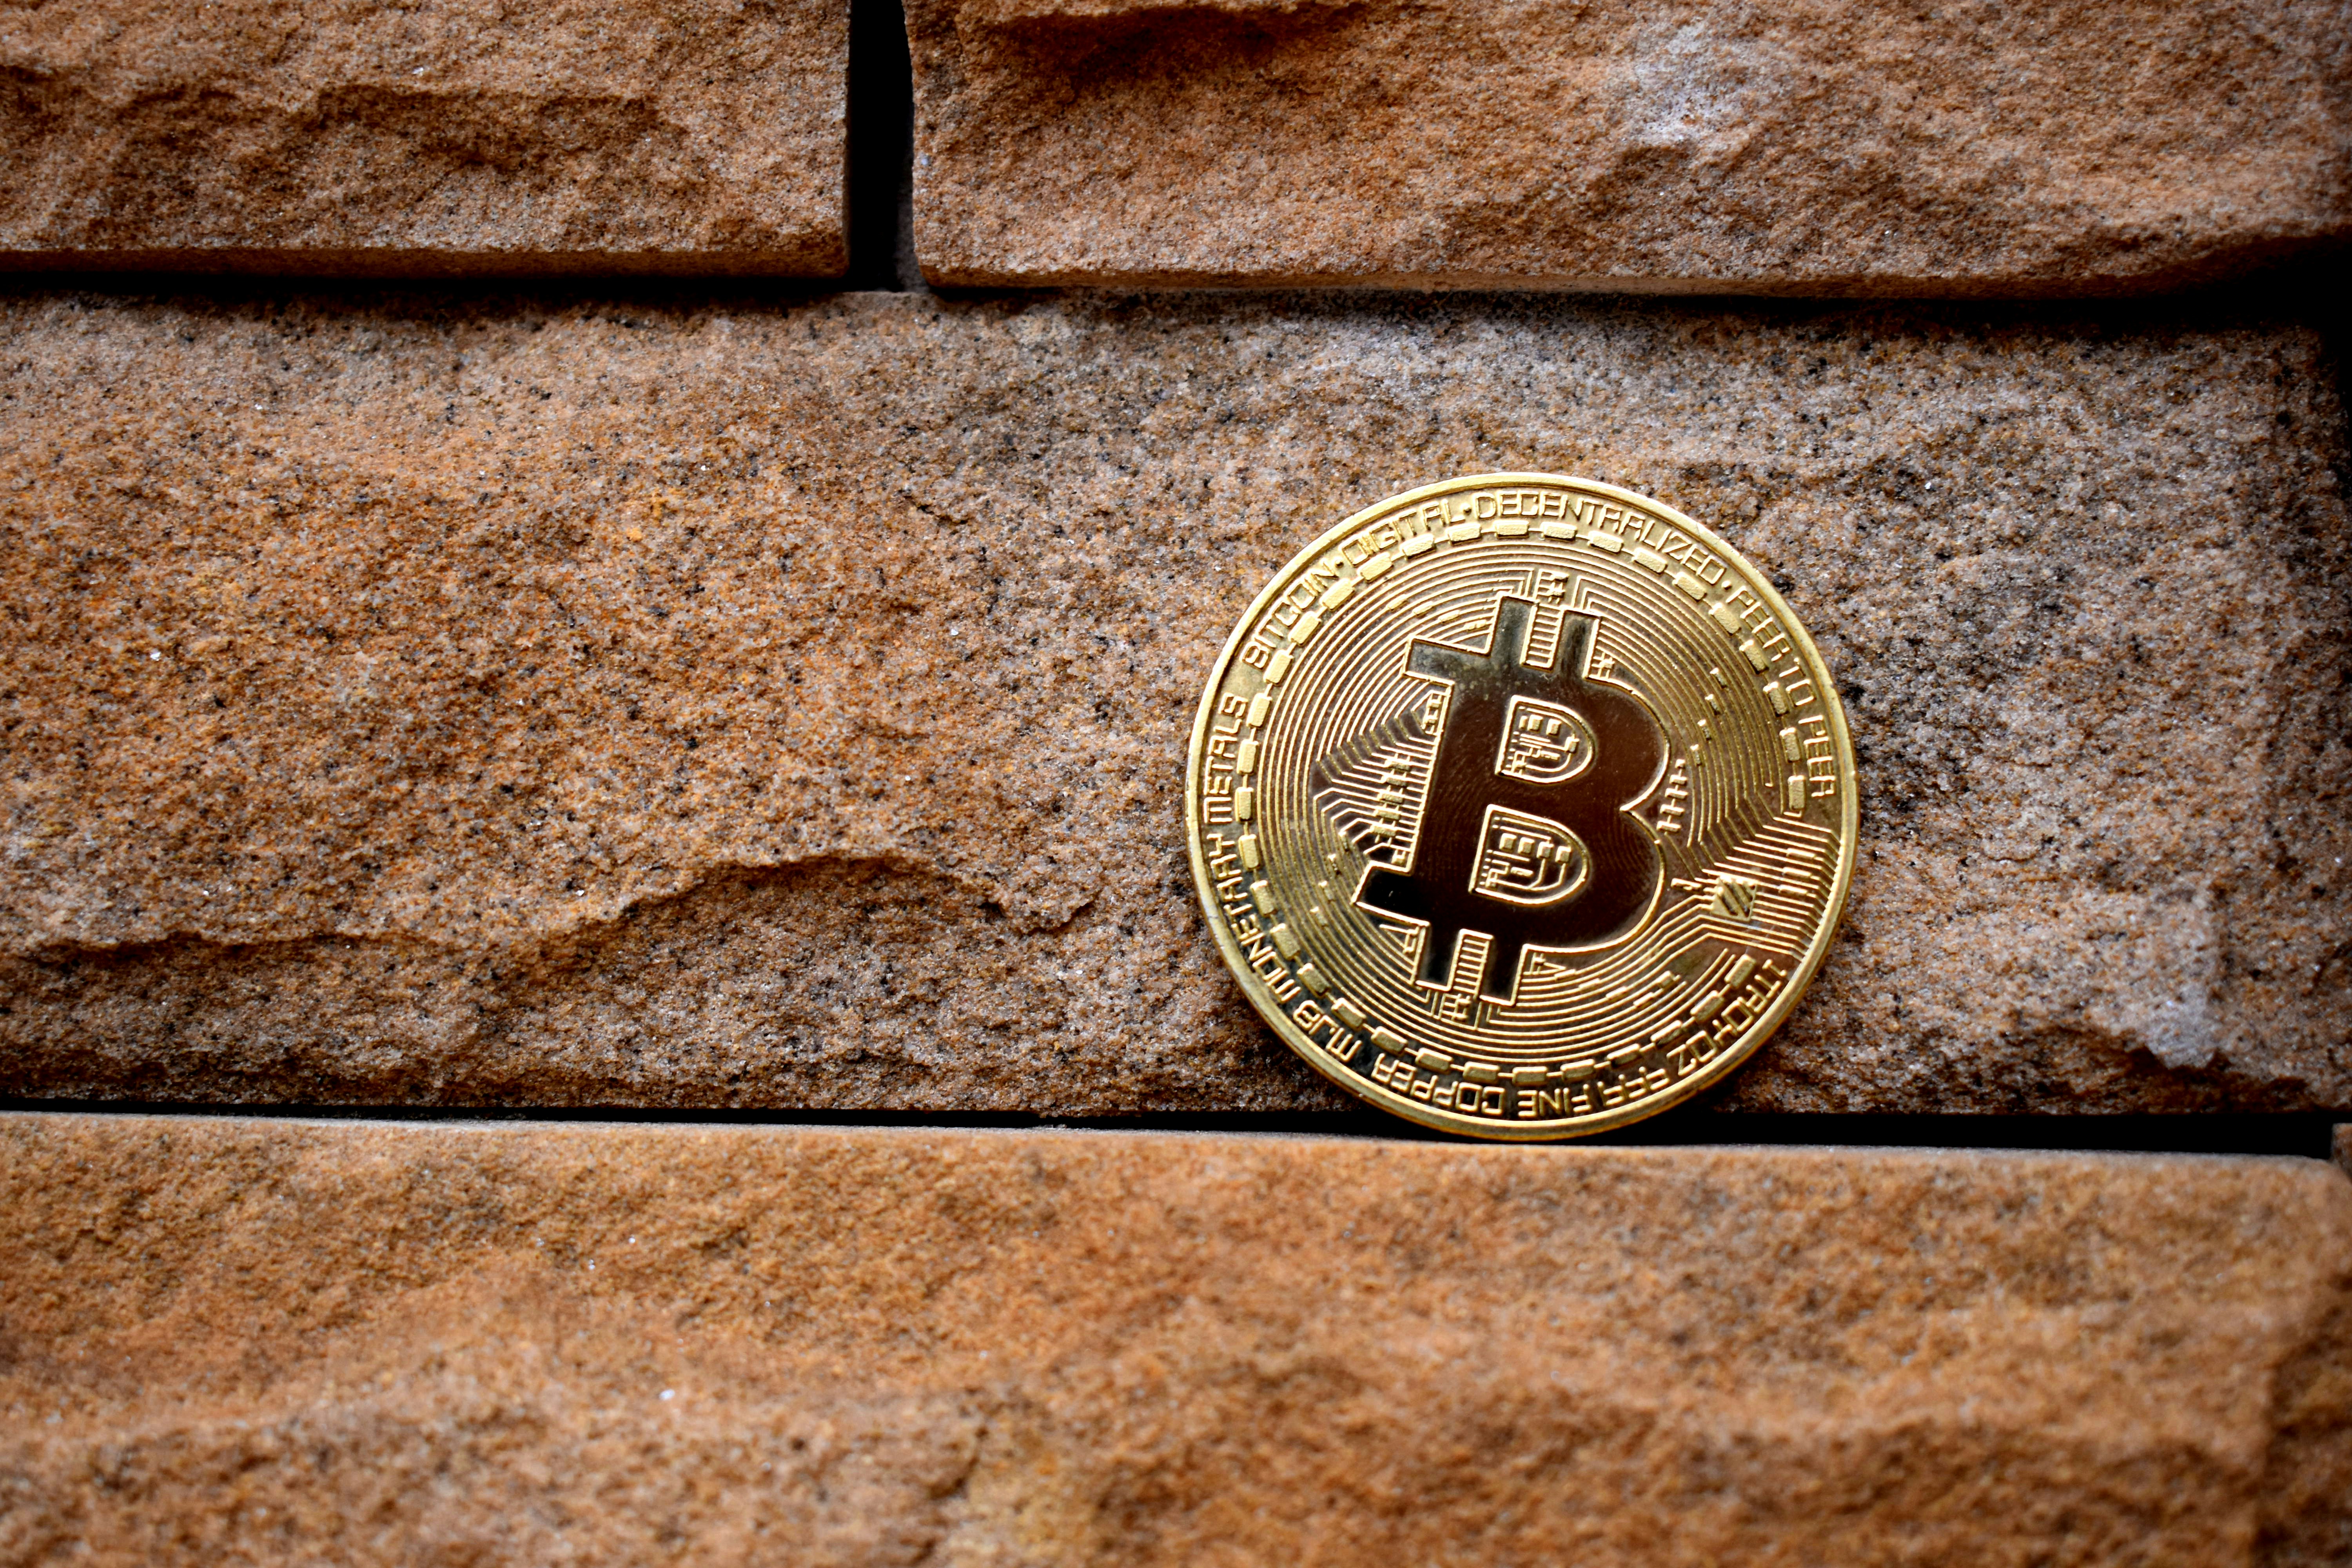 A Bitcoin on the cracks and crevices of a brick wall.